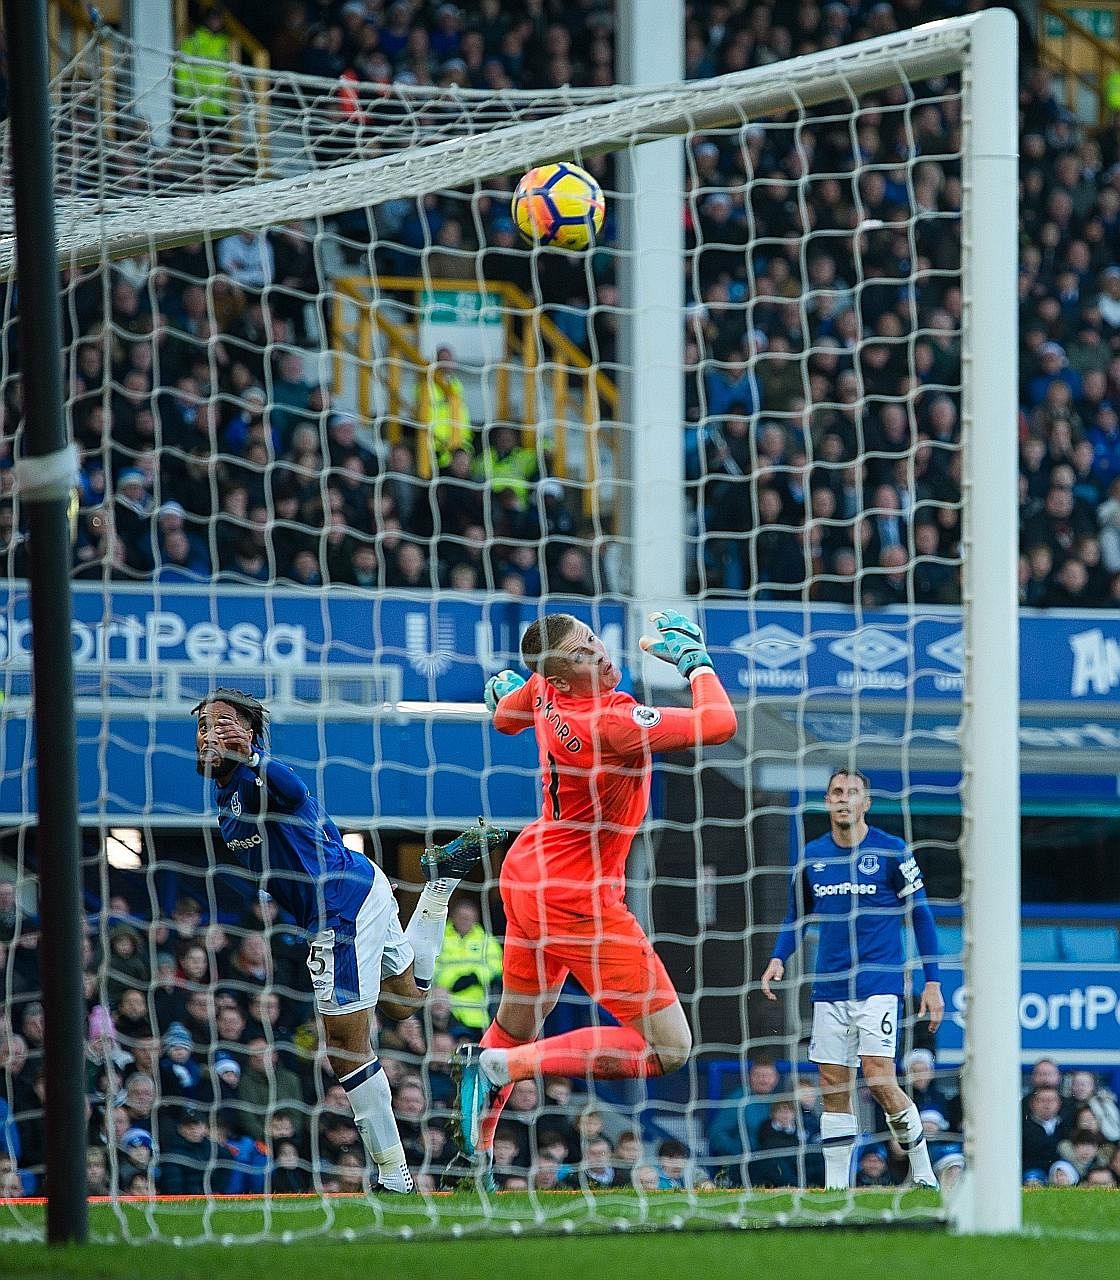 Everton centre-back Ashley Williams giving his team a fright by heading against his own crossbar in an attempt to clear the ball in the second half on Saturday. The Toffees shut up shop to keep out a toothless Chelsea side missing their No. 1 striker